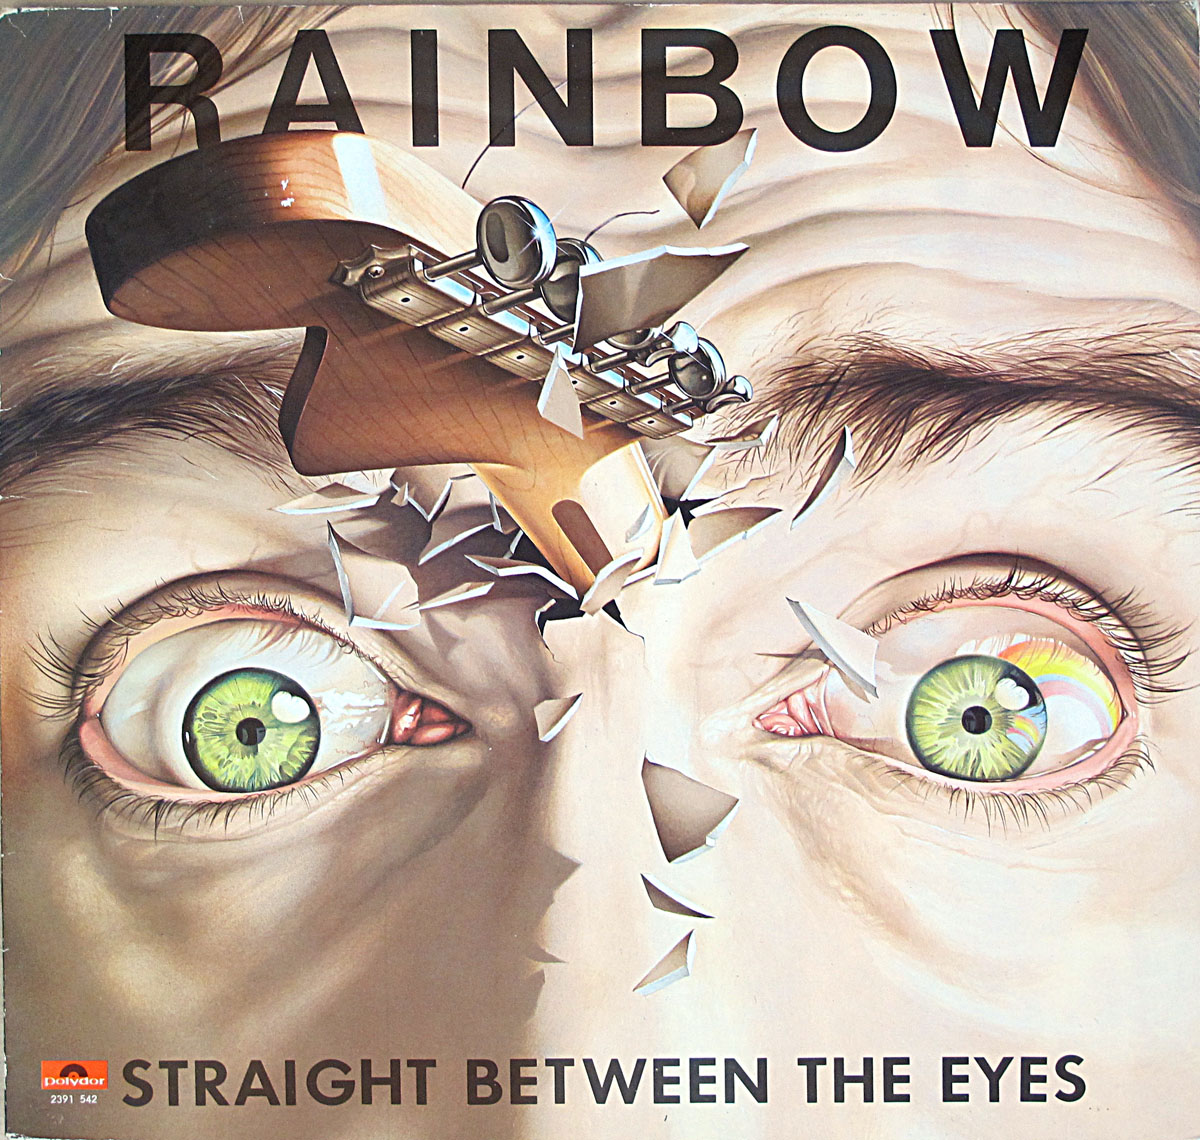 RAINBOW Straight Between the Eyes Album Cover Gallery & 12 Vinyl LP  Discography Information #vinylrecords